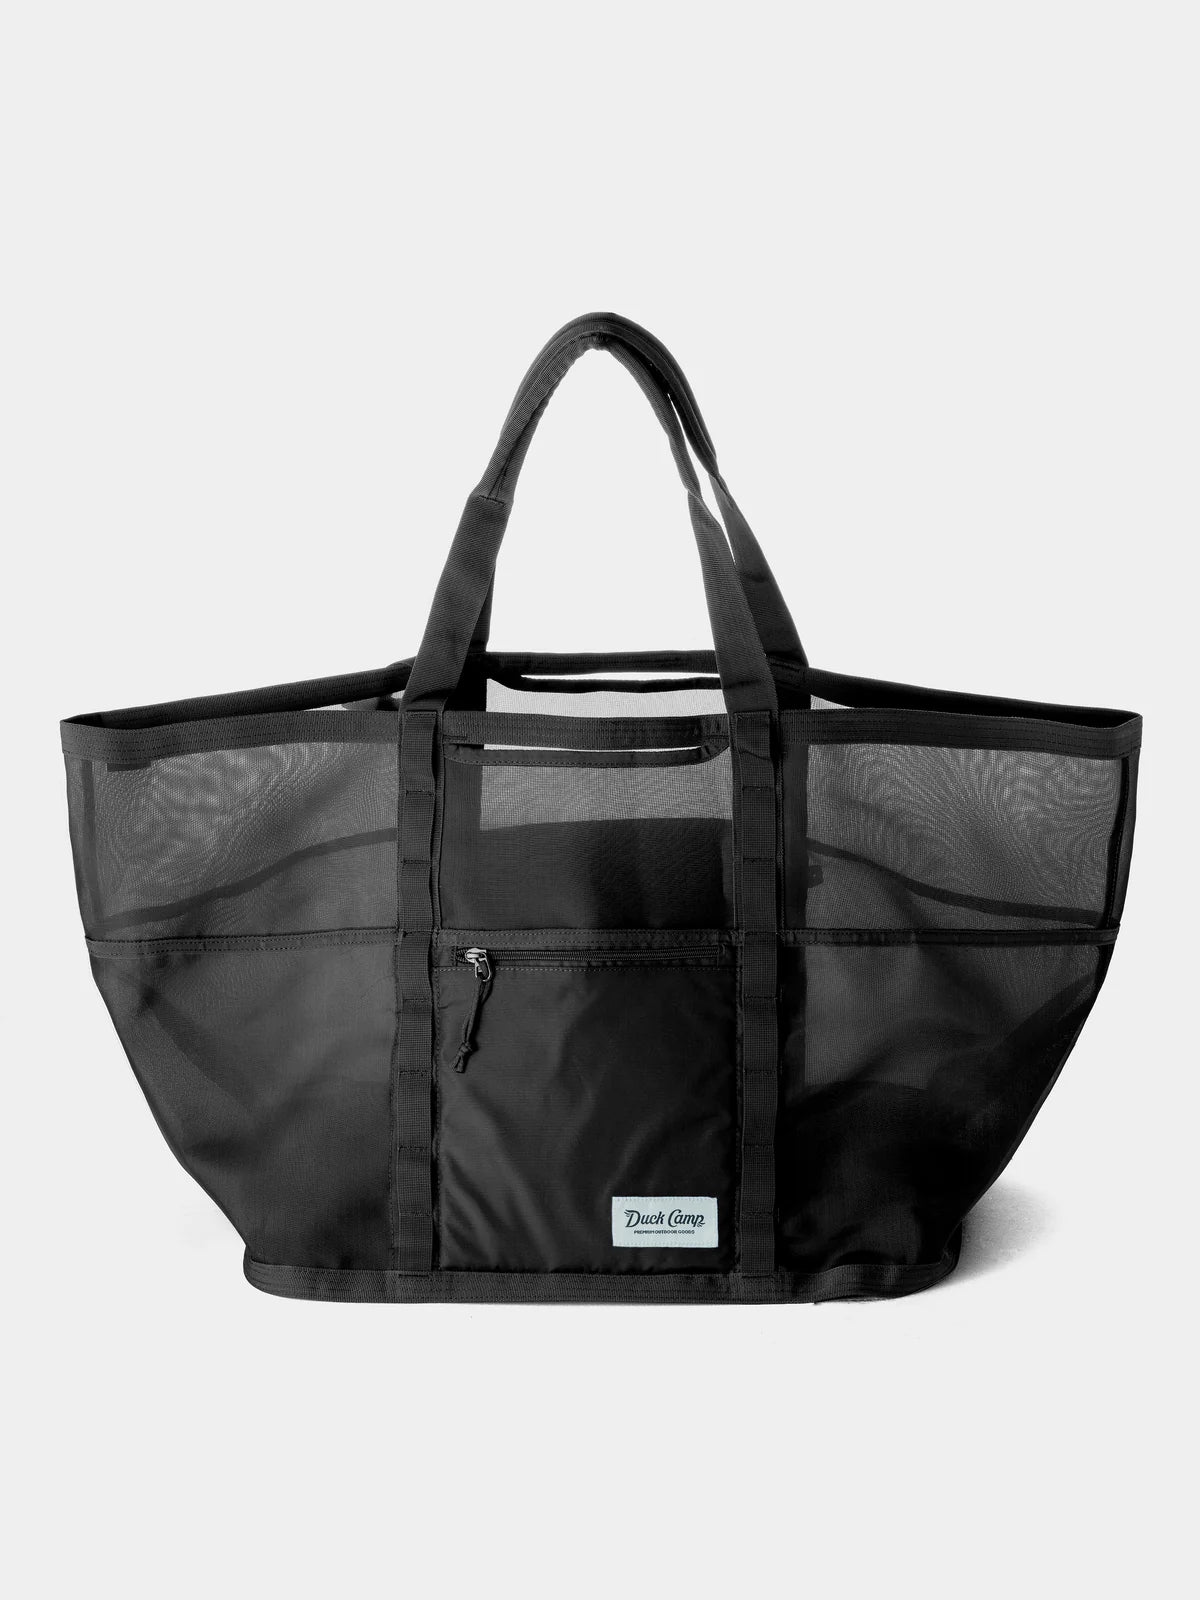 Duck Camp Large Mesh Gear Tote